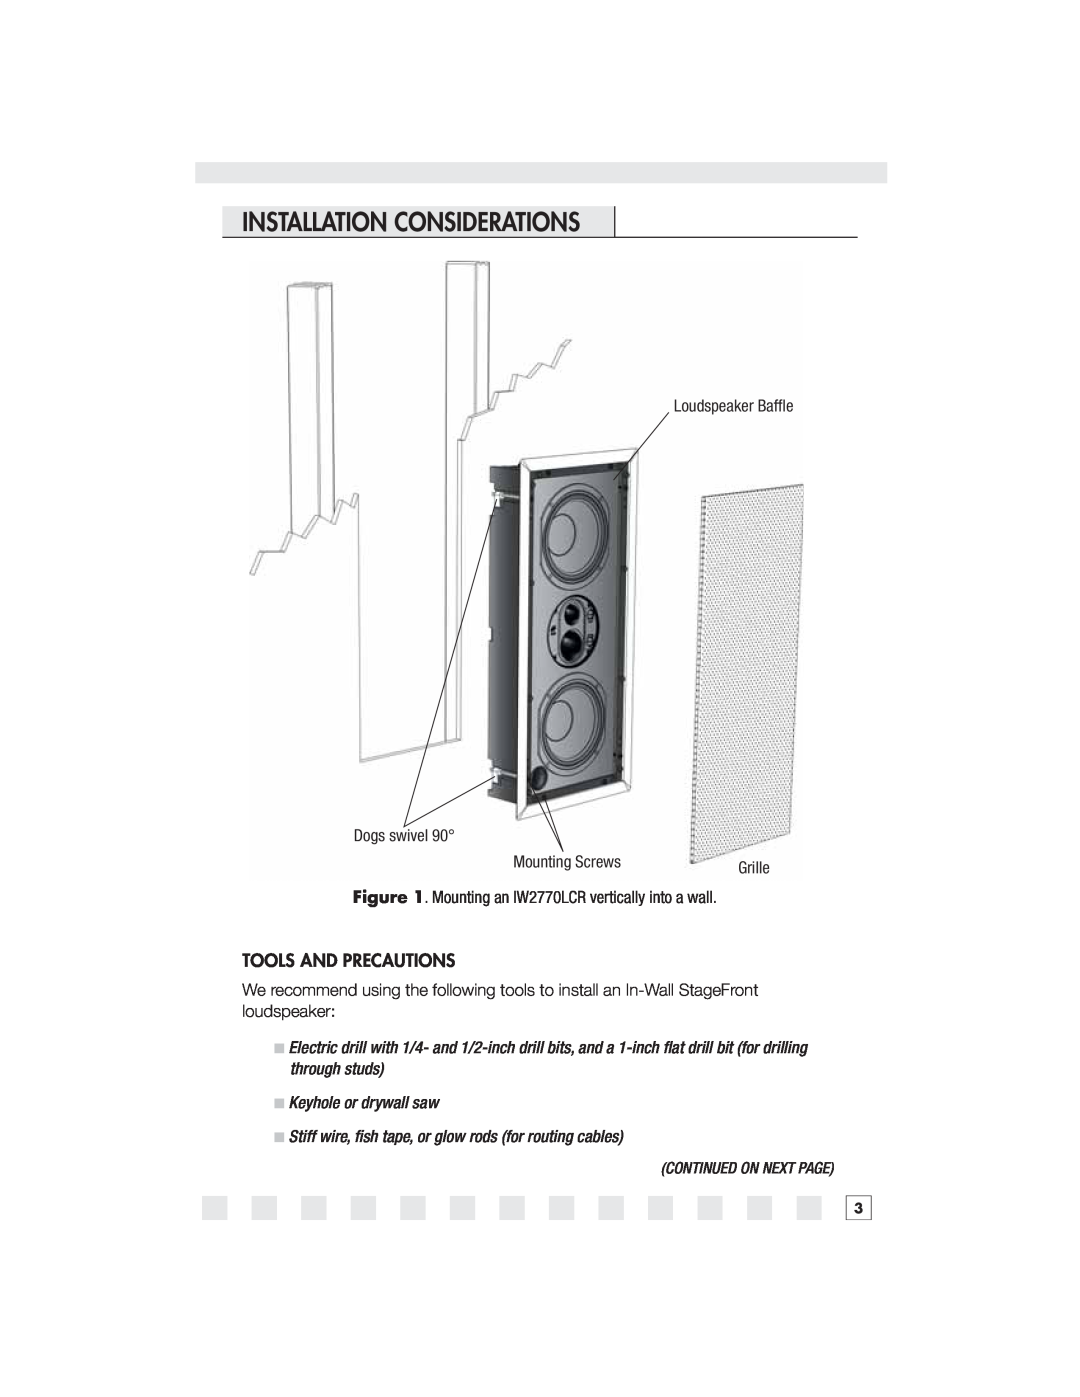 Niles Audio IW2650LCR Installation Considerations, Loudspeaker Bafﬂ e, Dogs swivel, Mounting Screws, Tools And Precautions 